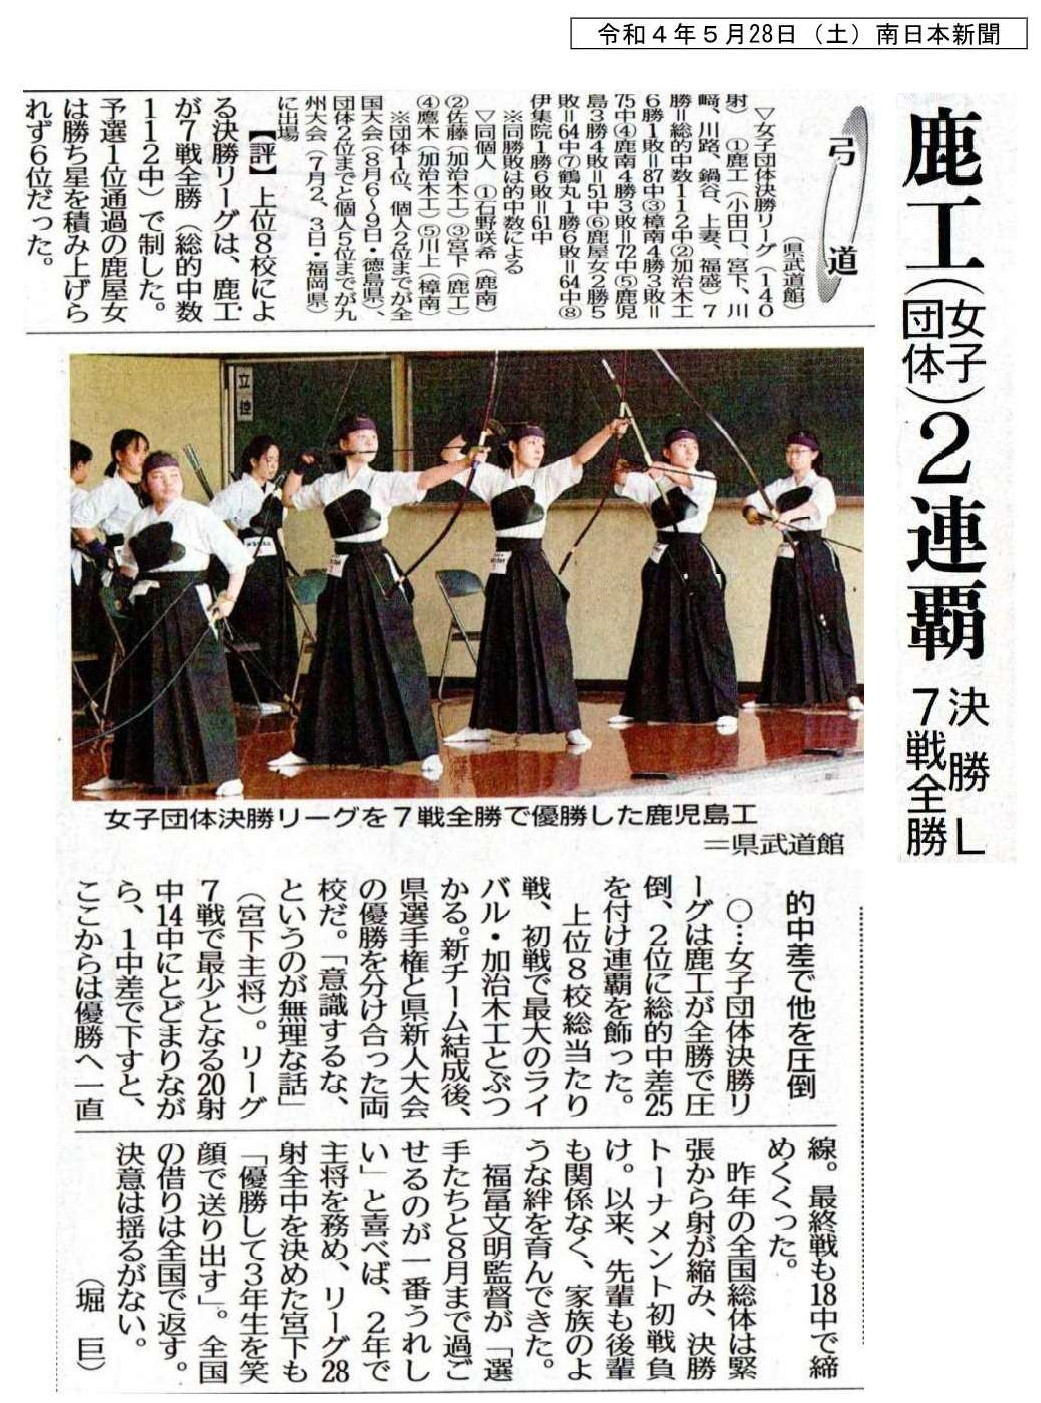 R040528 弓道陸上アーチェリー南日本新聞_1